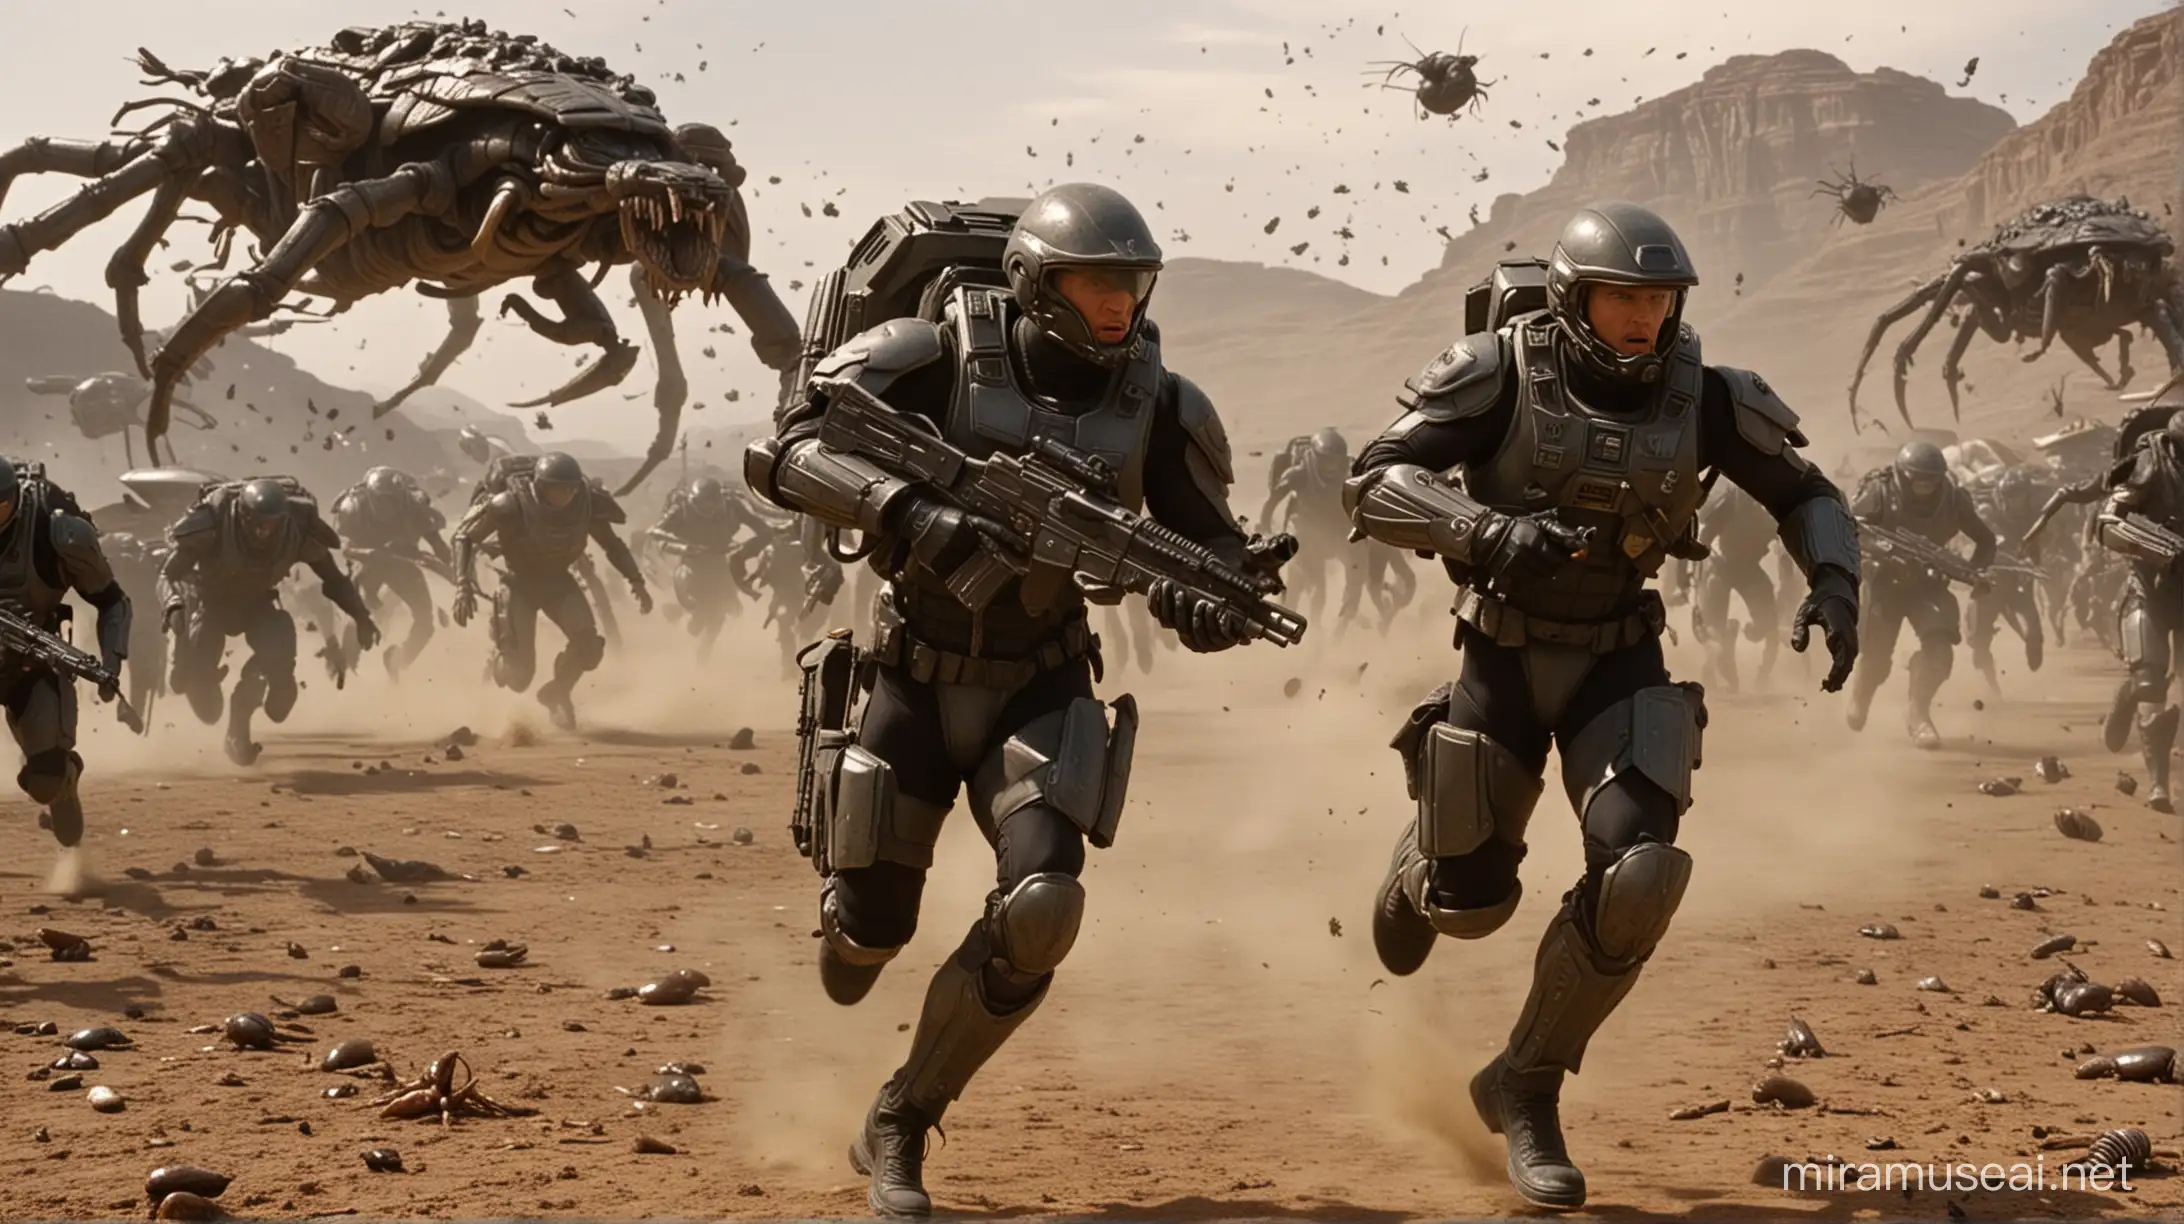 Starship Troopers Soldier Running from Alien Bugs